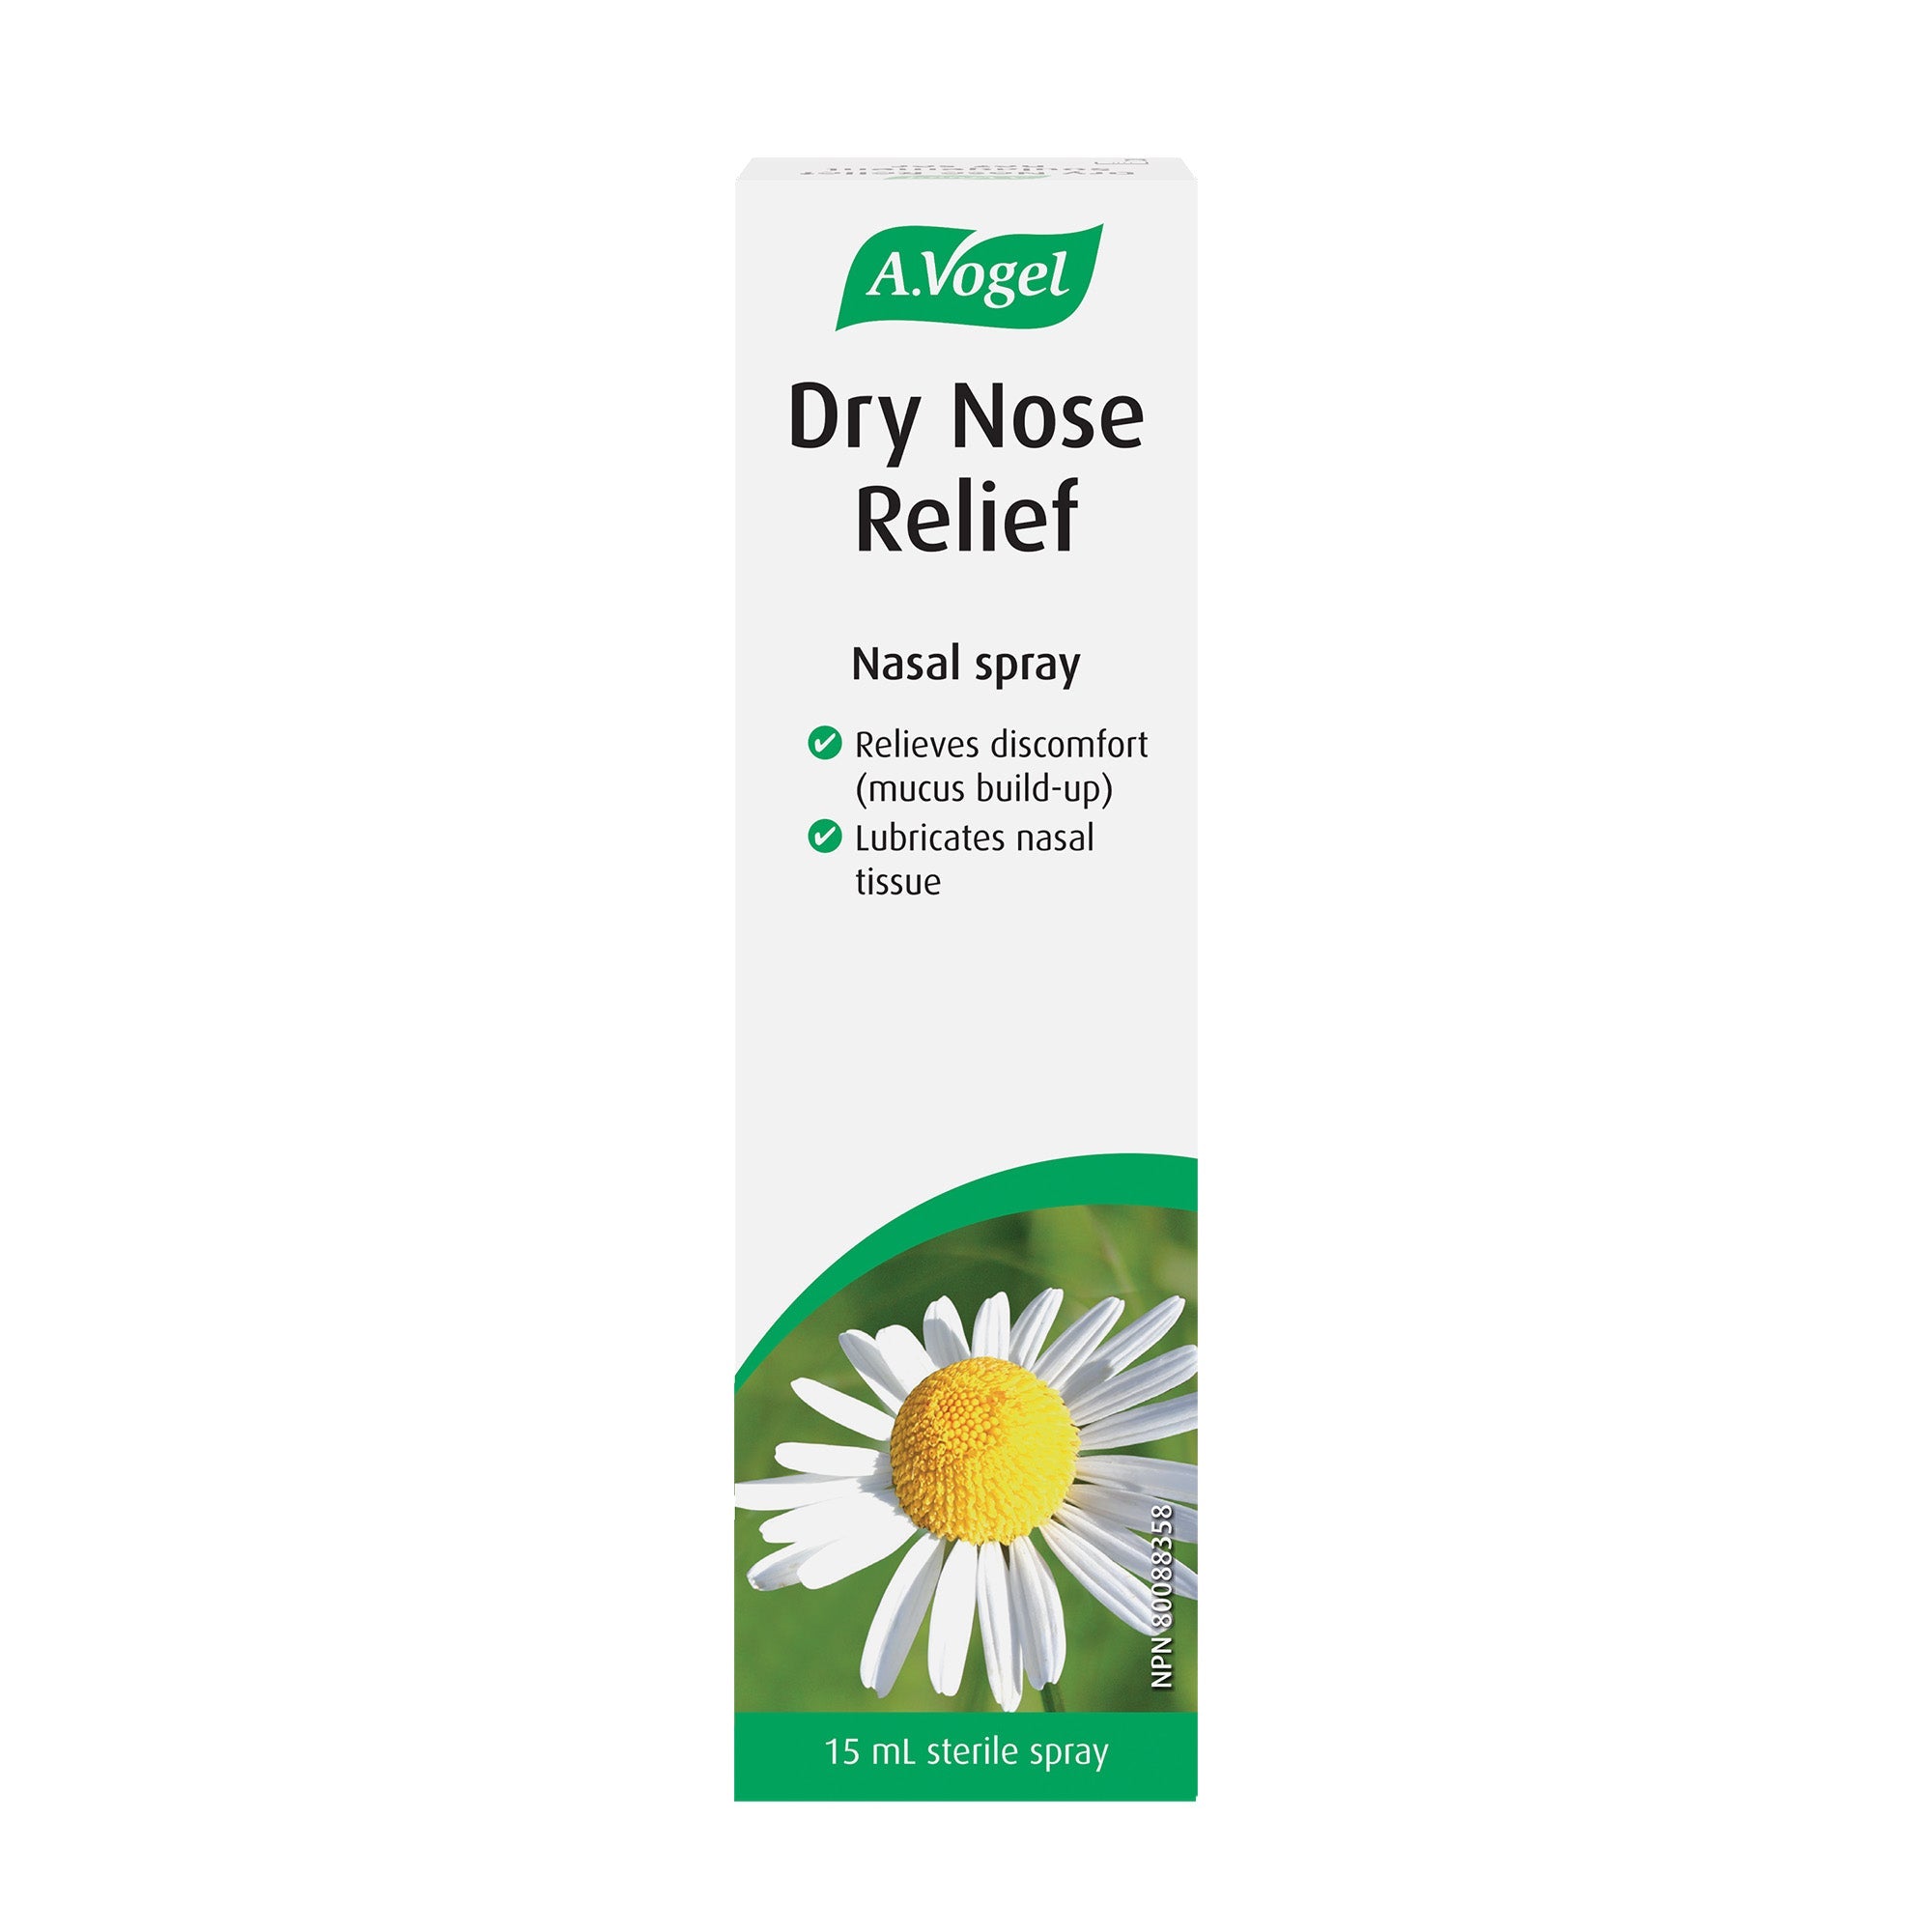 A.Vogel Dry Nose Relief - Fast-acting Nasal Spray 15mL - A.Vogel Canada